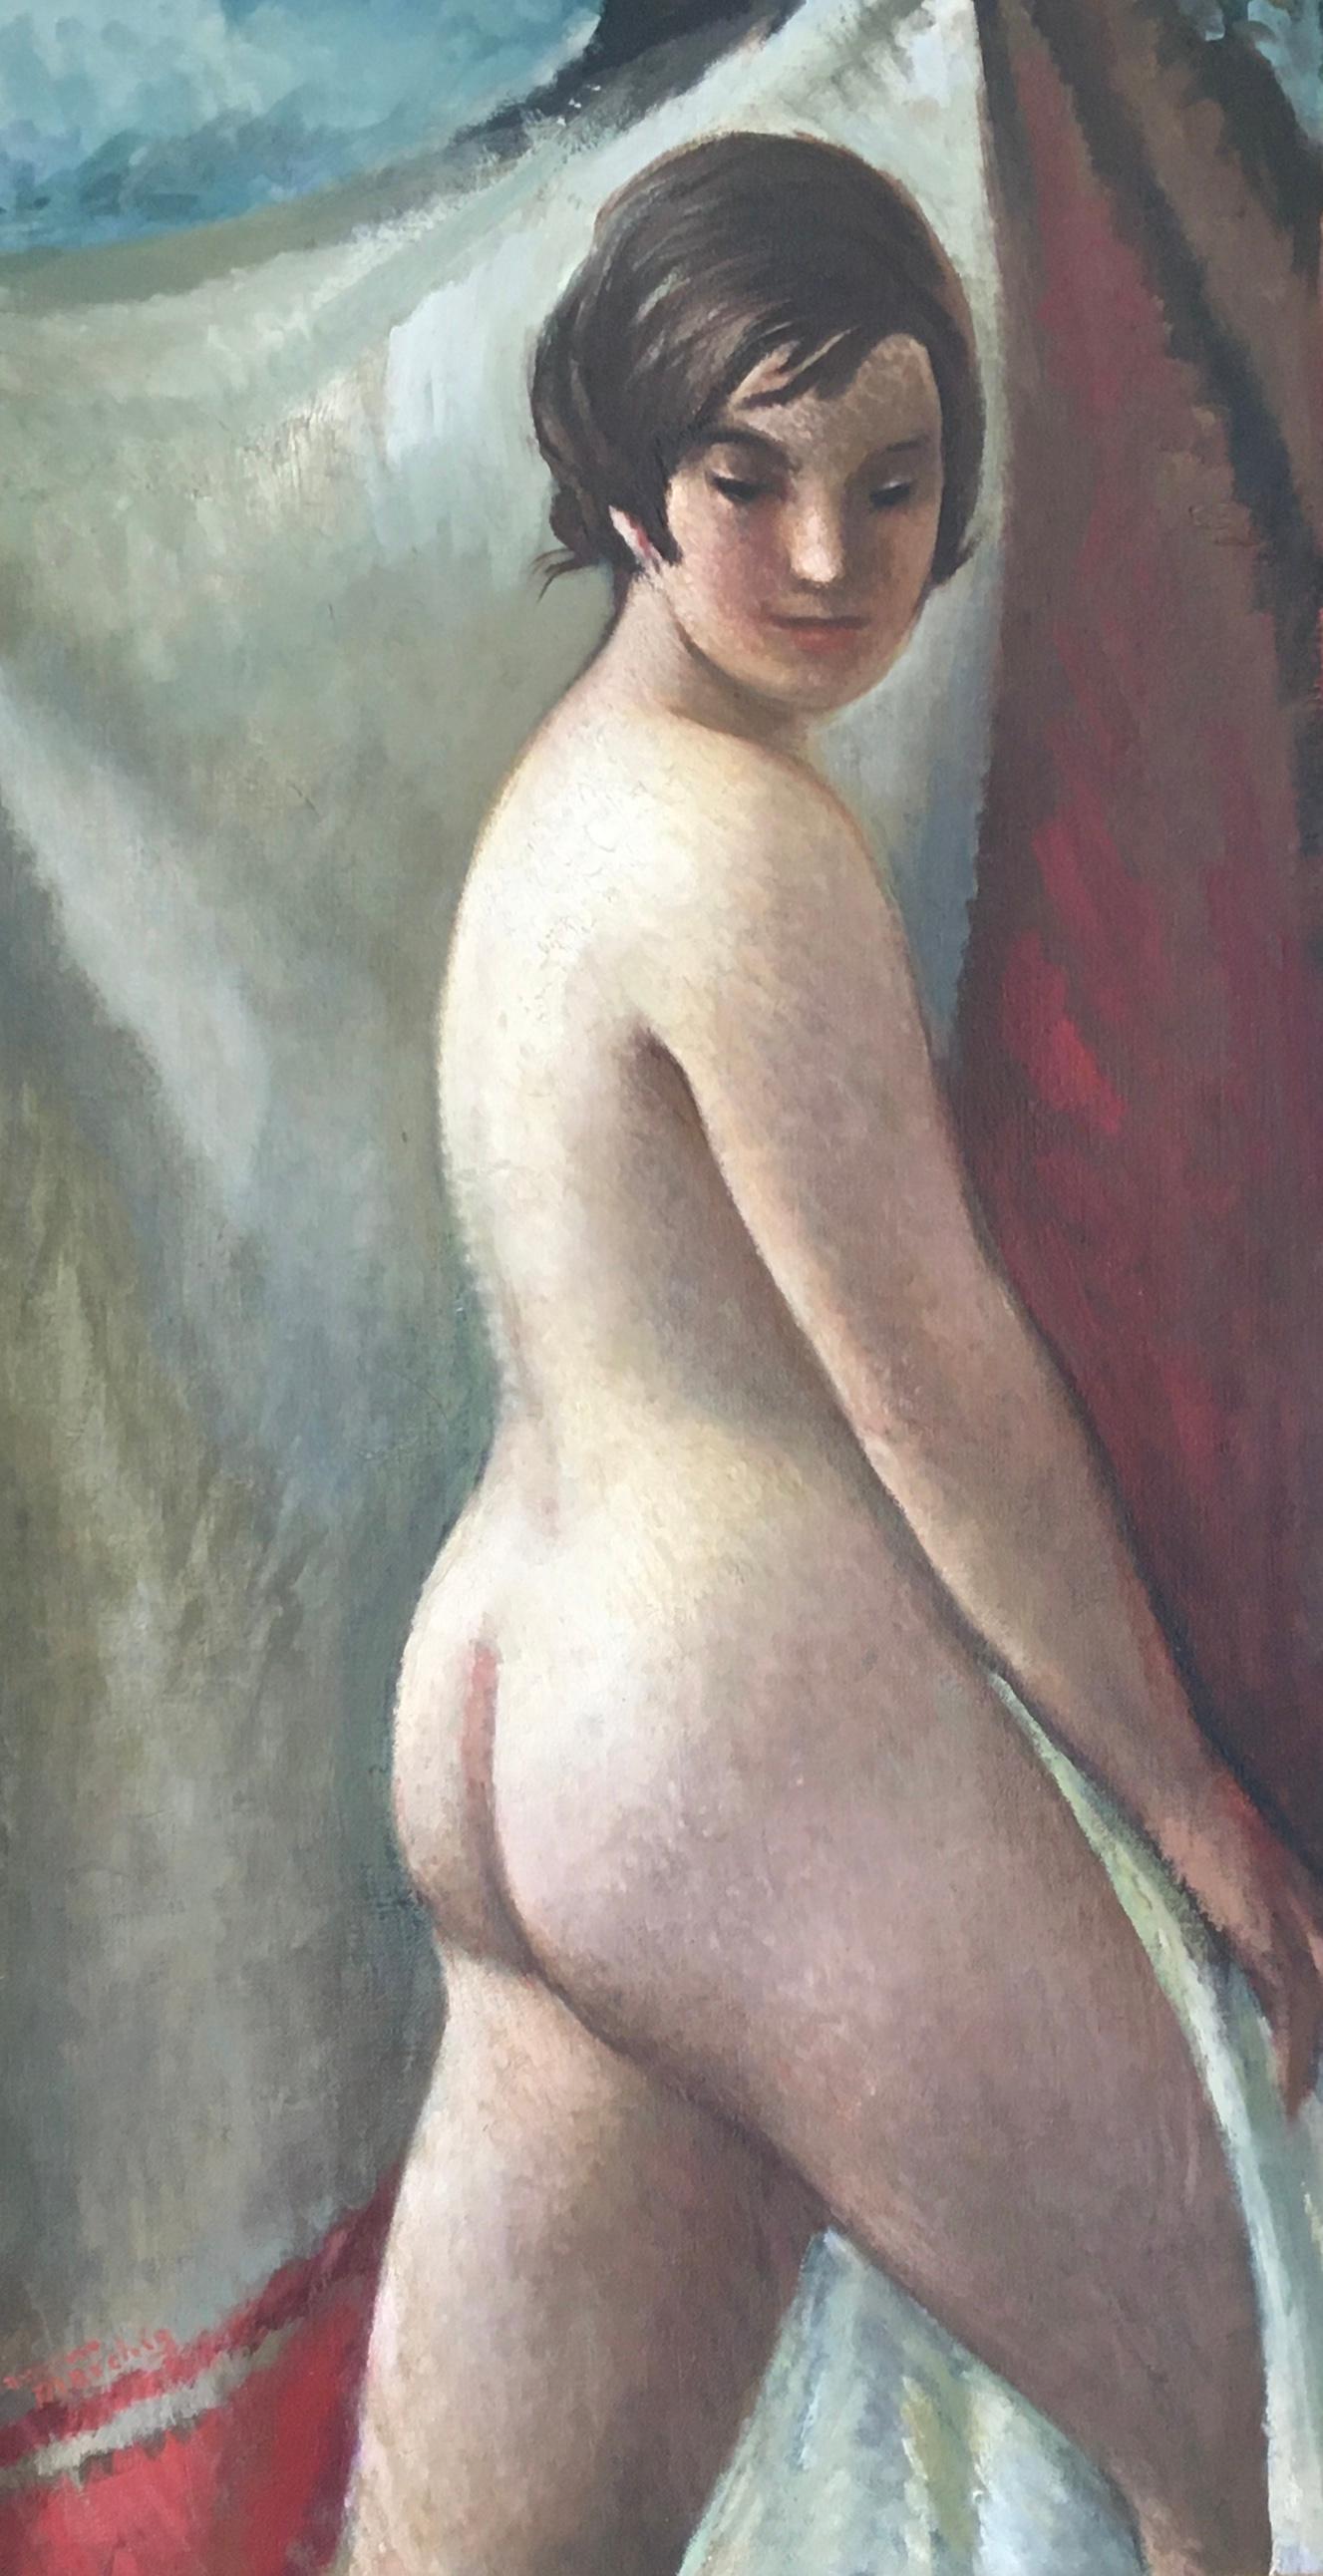 Naked young woman from behind - Painting by Giannino Marchig